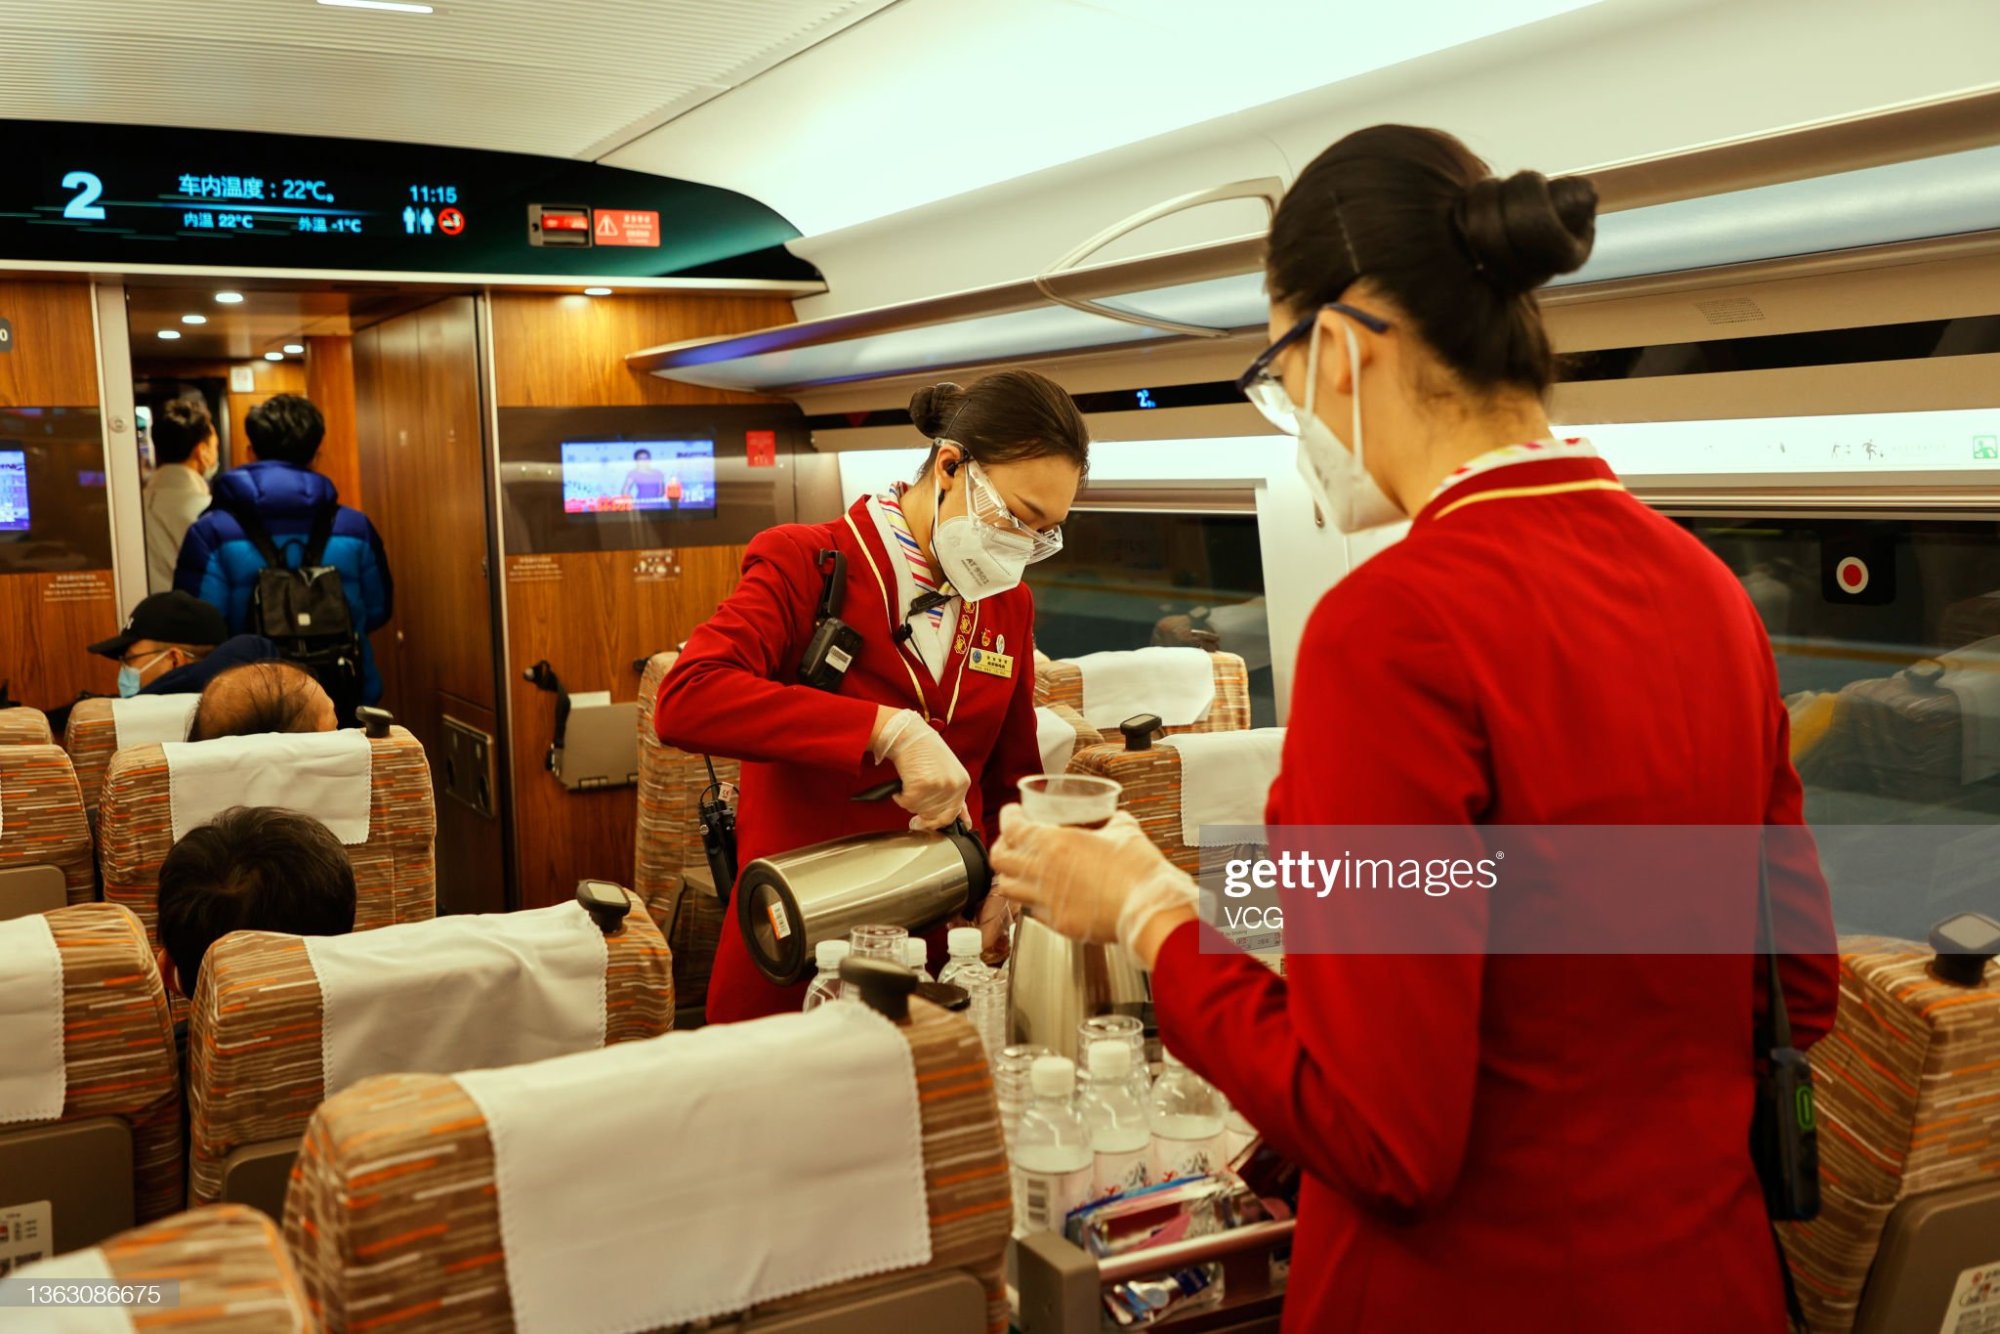 gettyimages-1363086675-2048x2048.jpg